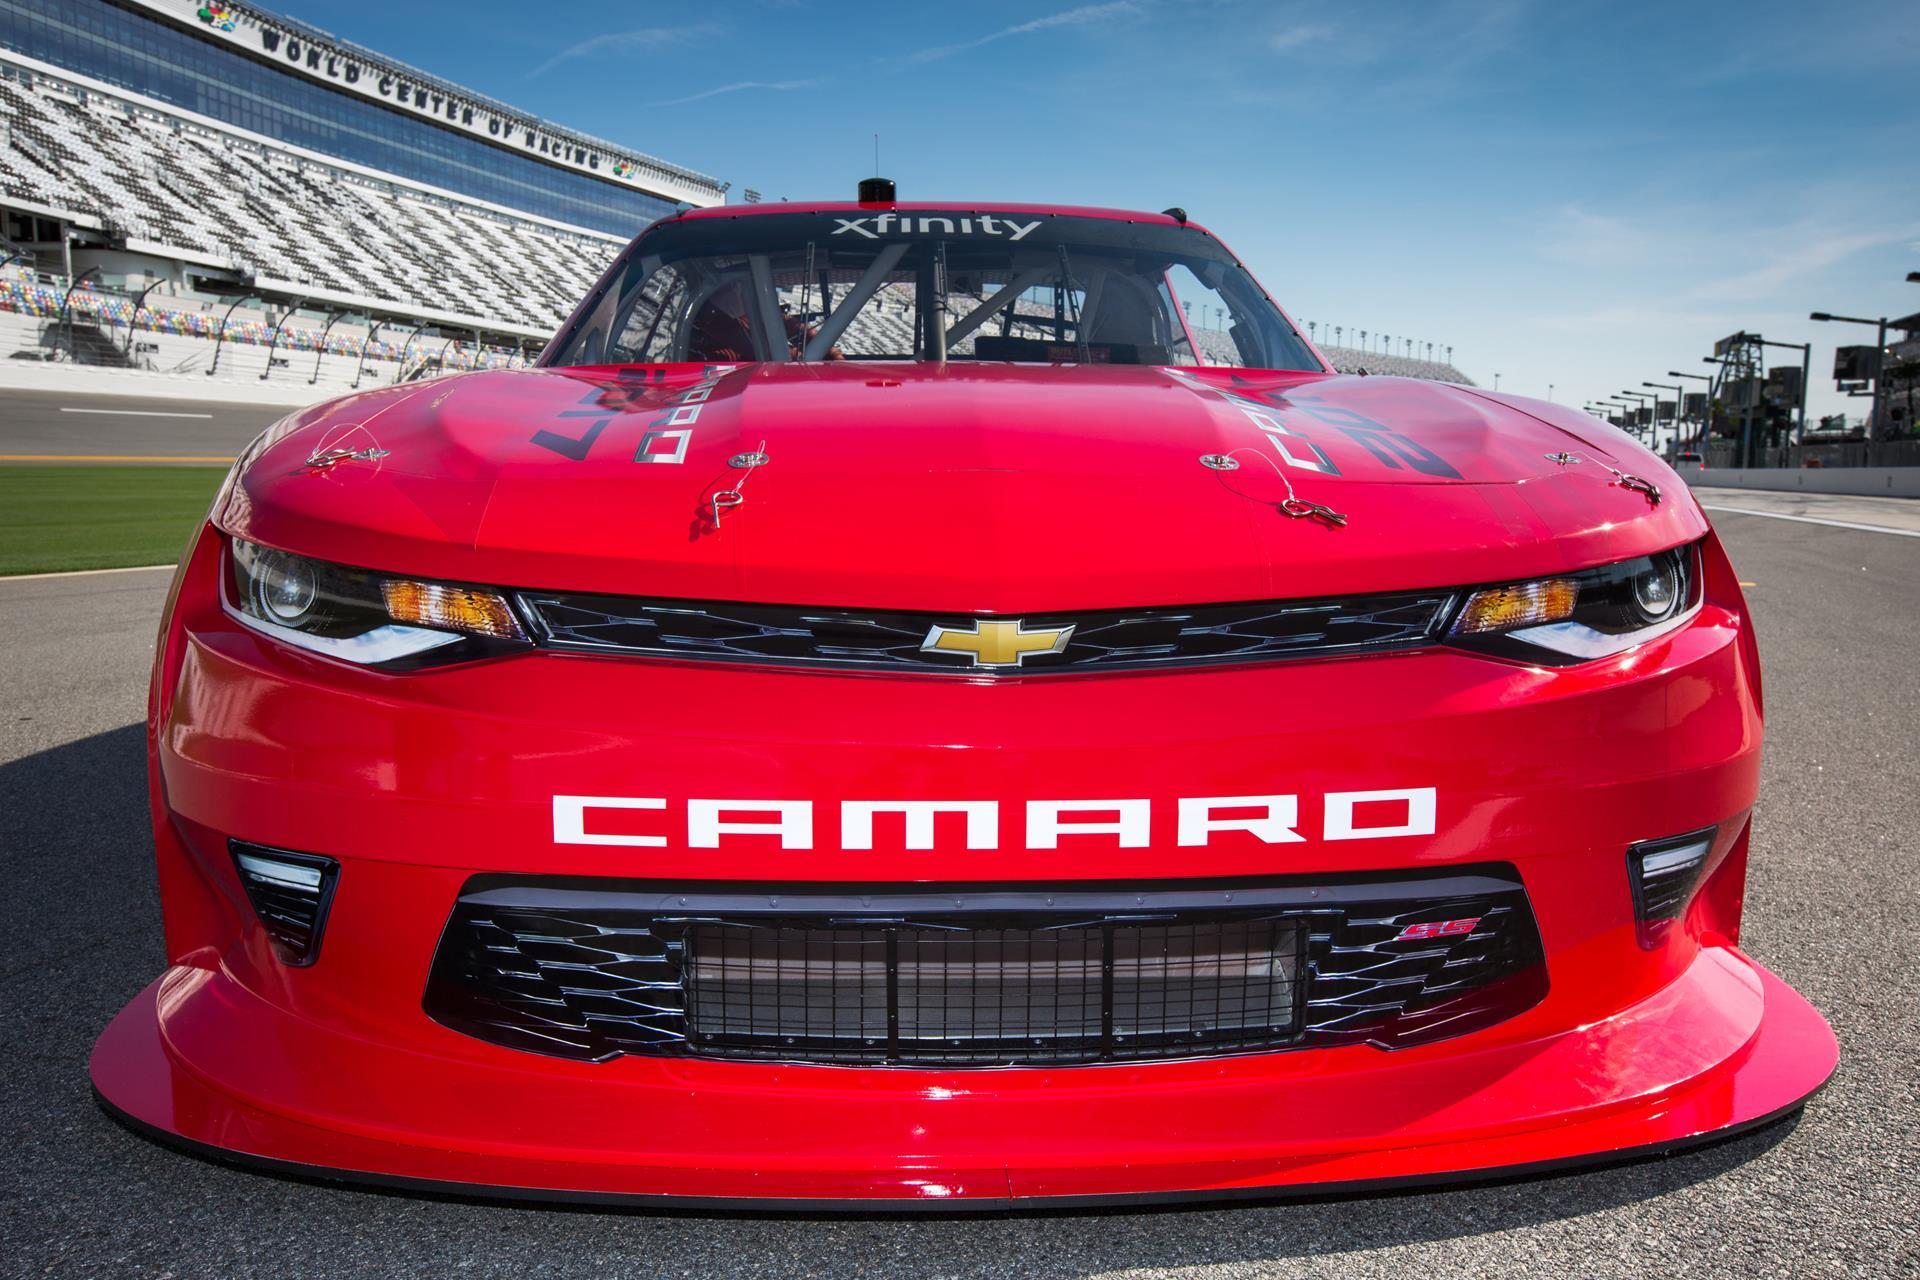 2017 Chevrolet Camaro NASCAR Pictures, News, Research 